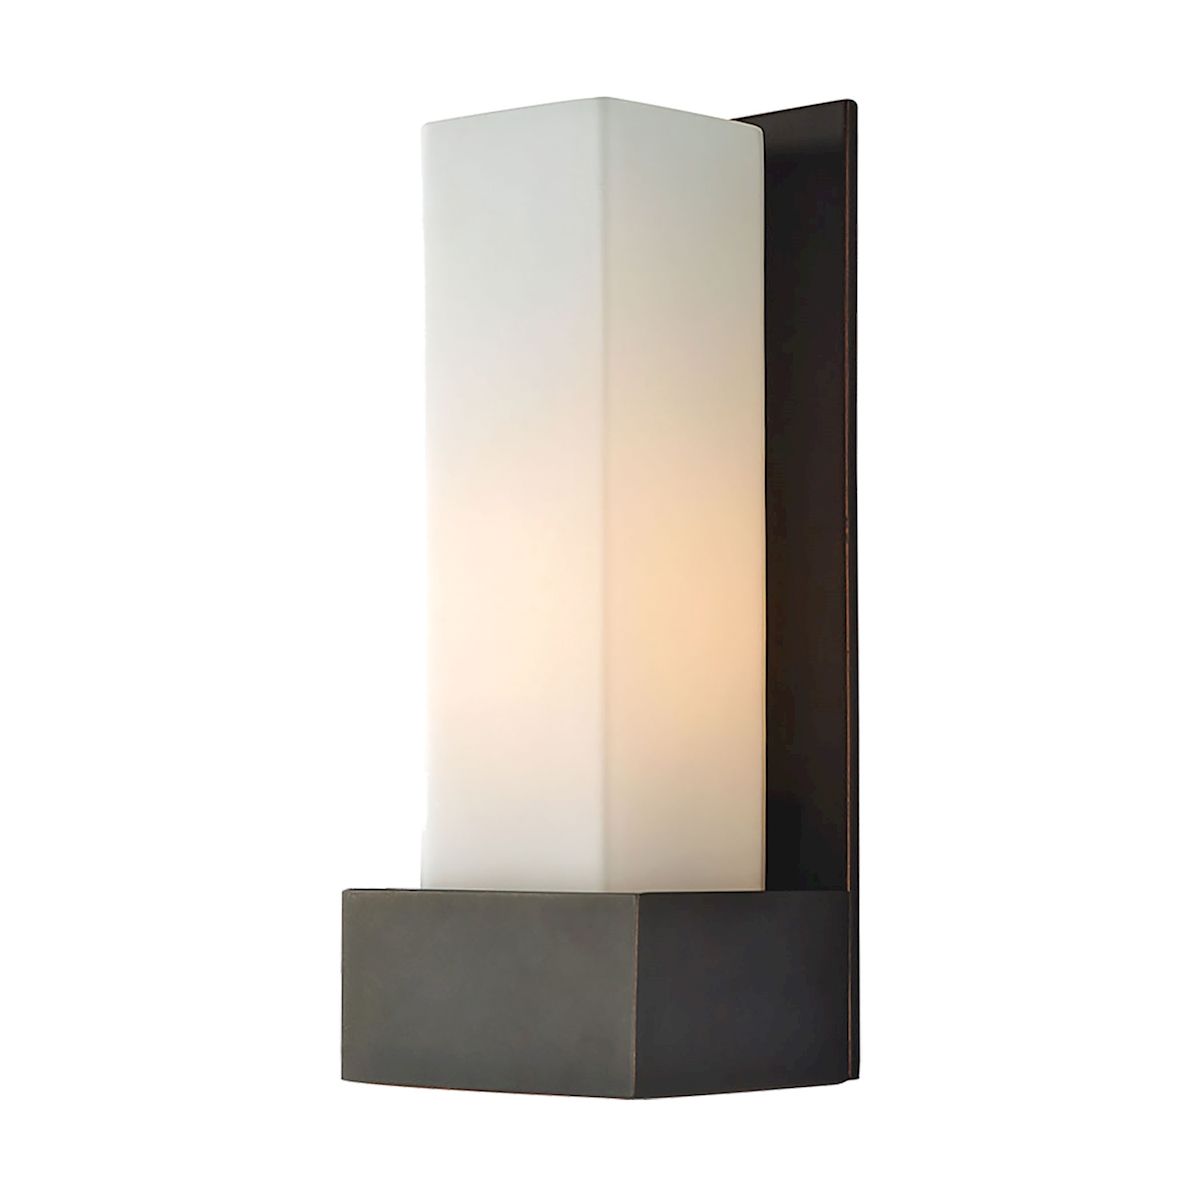 Solo Tall 1-Light Sconce in Oil Rubbed Bronze with White Opal Glass_WS121-10-45